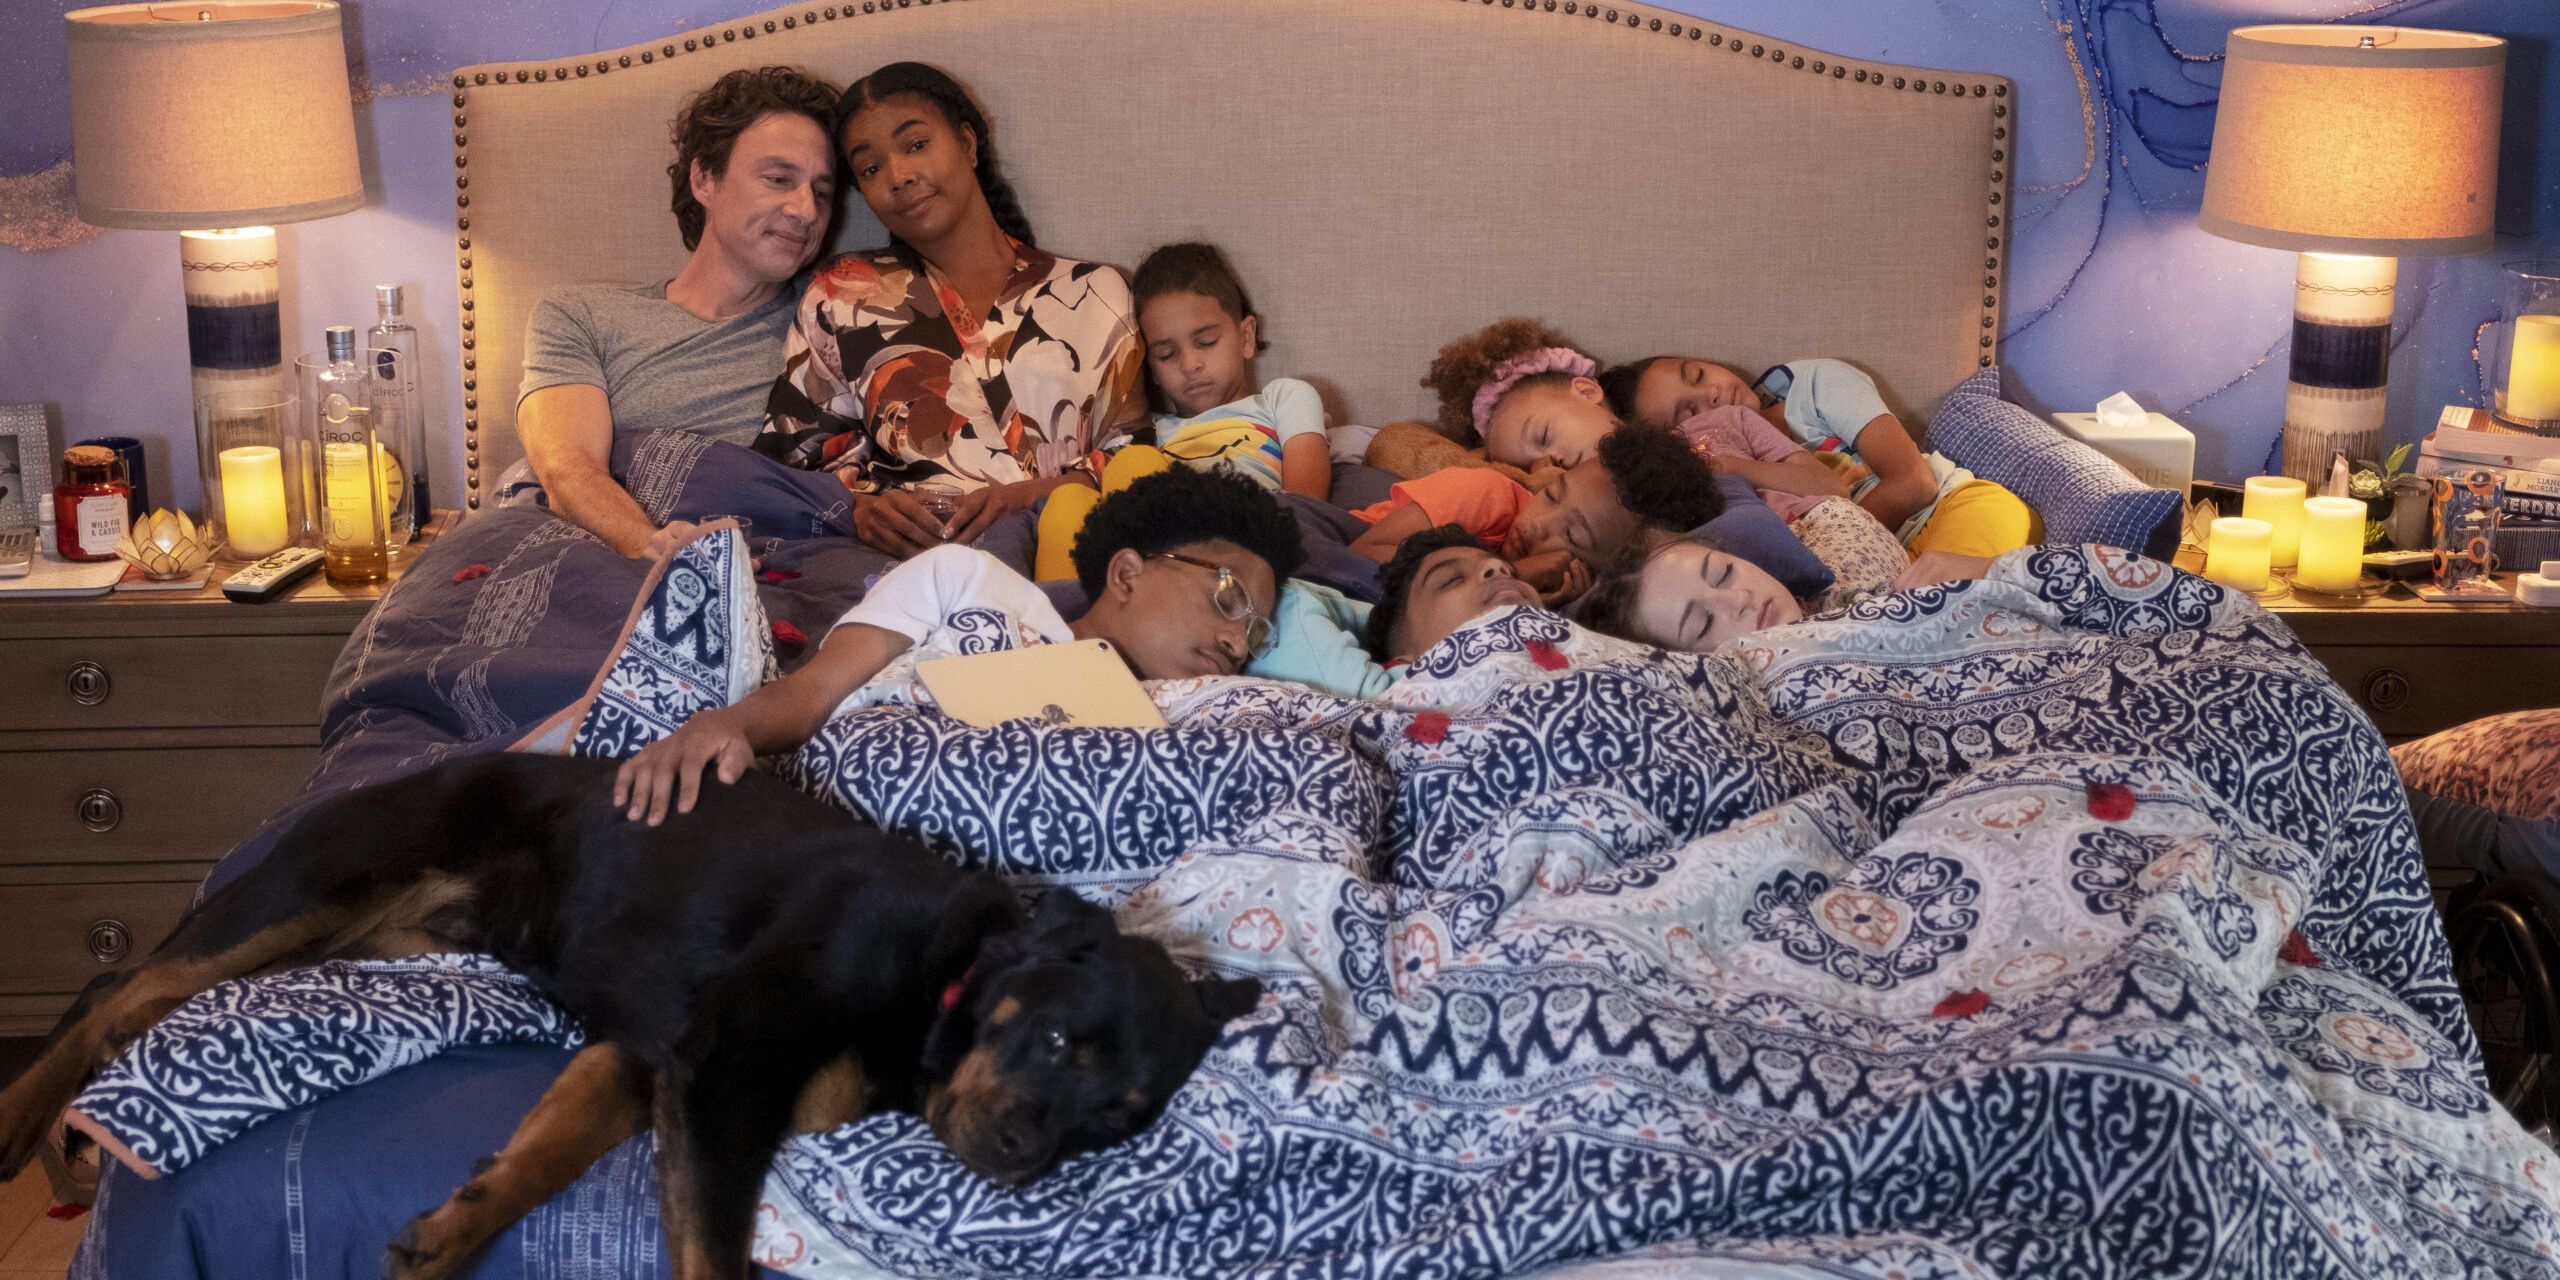 Cheaper By The Dozen 2022 The Bakers all cuddle together in bed